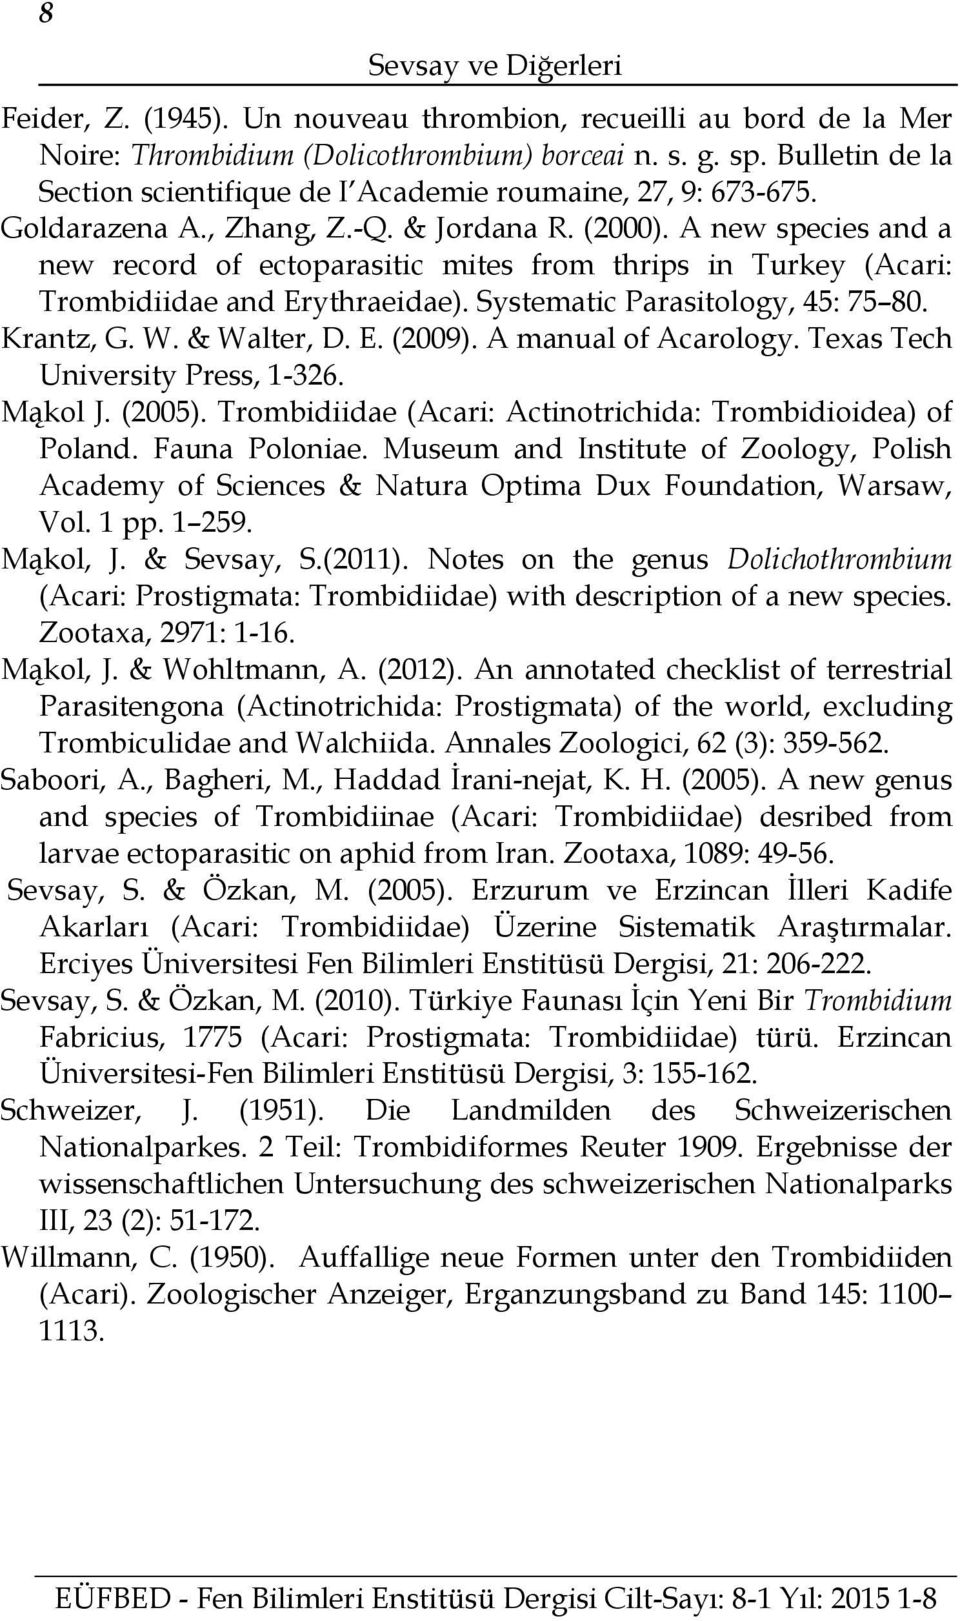 A new species and a new record of ectoparasitic mites from thrips in Turkey (Acari: Trombidiidae and Erythraeidae). Systematic Parasitology, 45: 75 80. Krantz, G. W. & Walter, D. E. (2009).